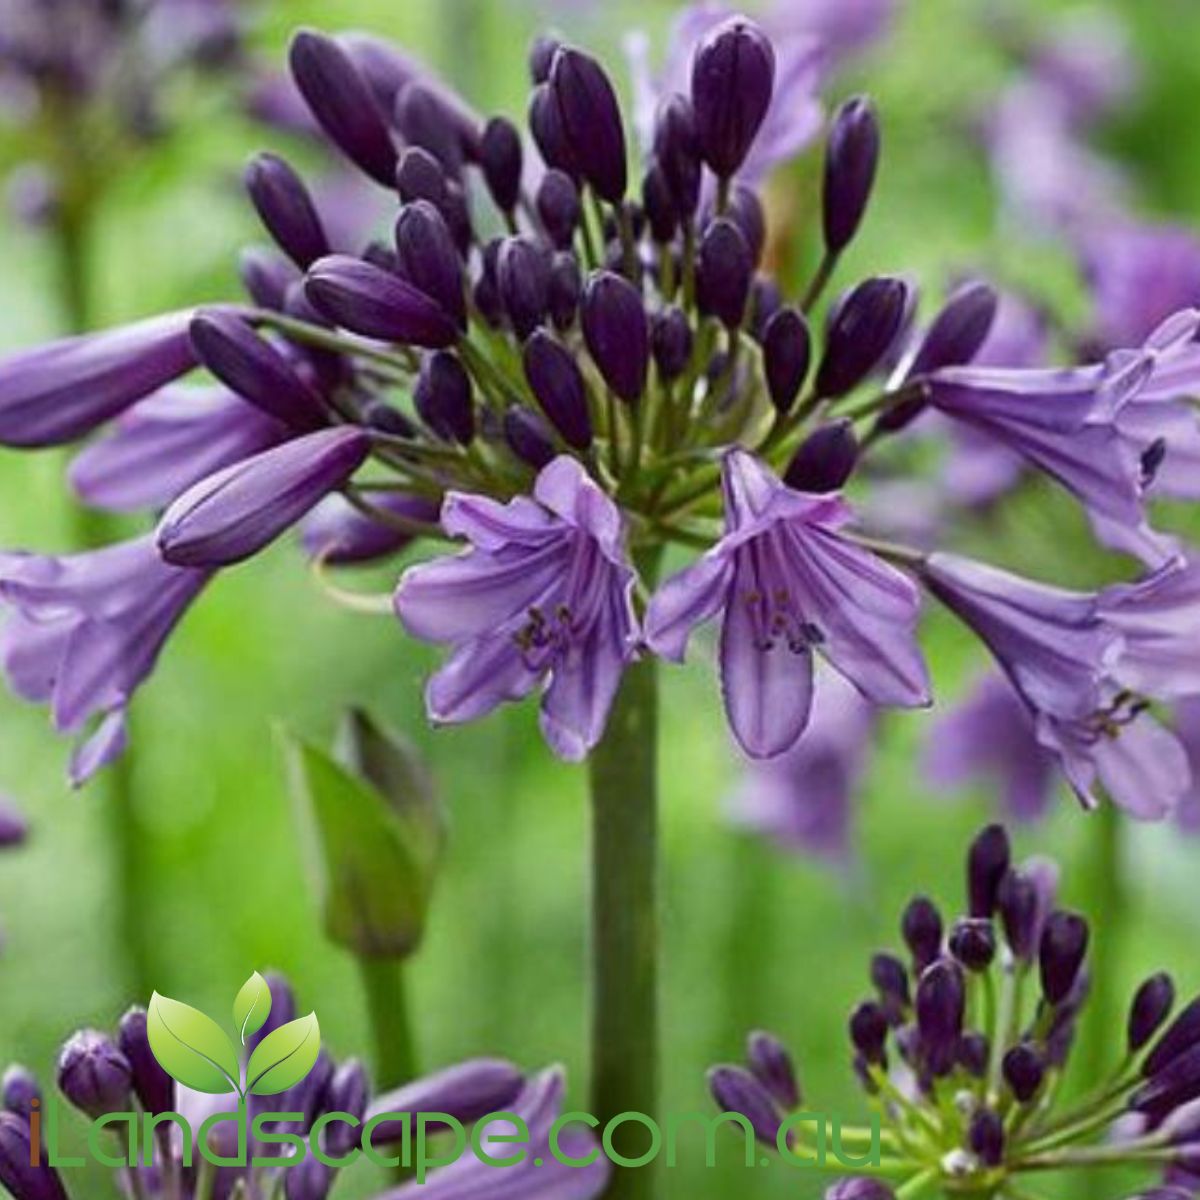 Agapanthus Poppin Purple is a purpose bred agapanthus that prolifically produces masses of flowers. growing around 50-70 cm tall this plant produces stunning heads of purple flowers perfect for border planting or in pots 